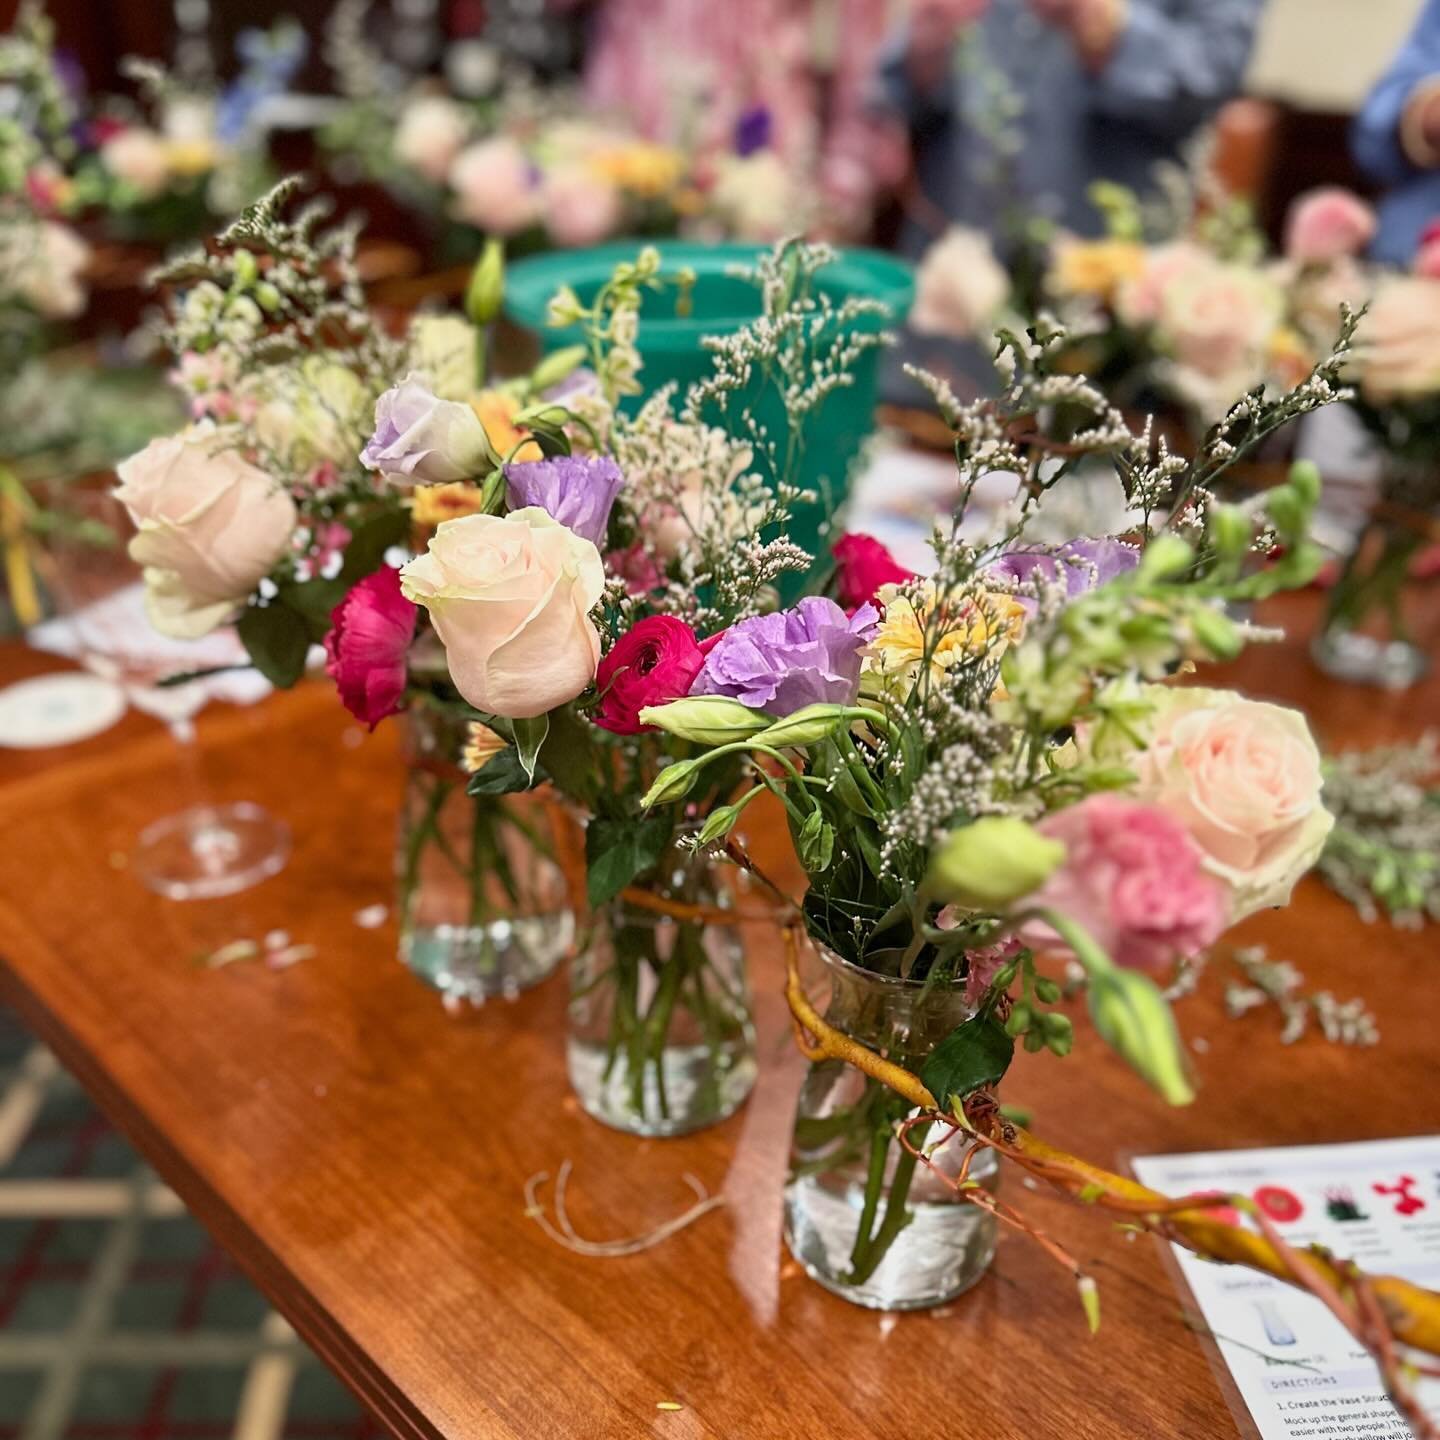 🙏🏻 Huge thank you to the @baycolonygardenclub for letting us teach a private workshop at their April meeting last night @princessannecc! We absolutely loved designing with this talented group. Everyone did great! 

Want to host a private workshop f